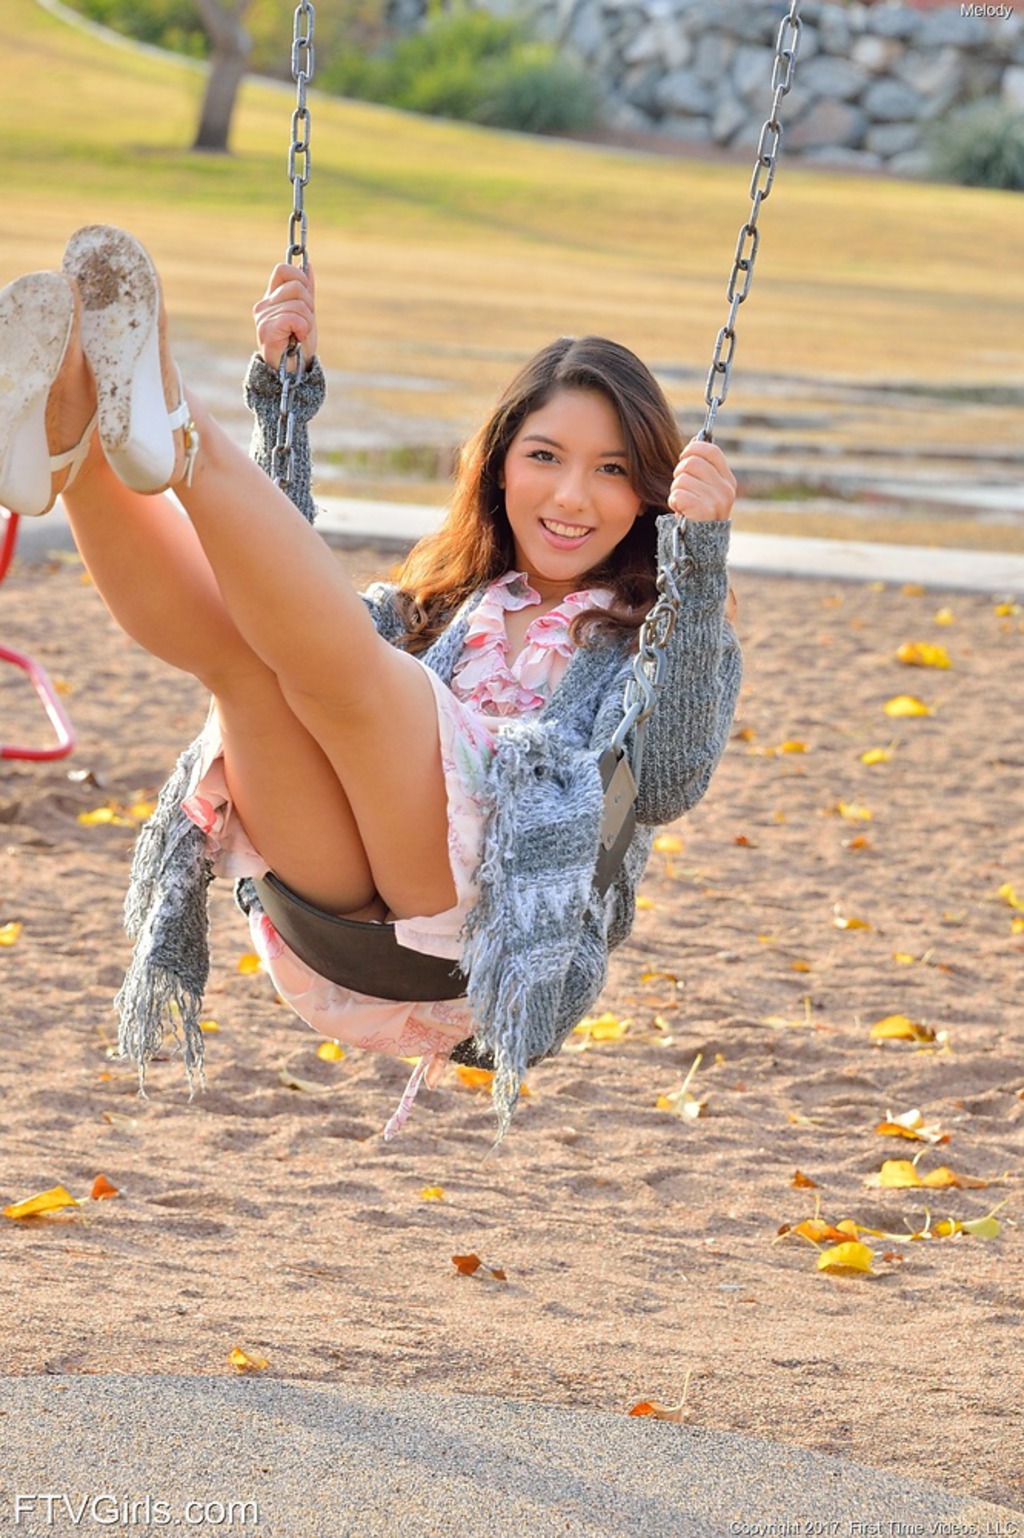 Melody In At The Playground 03